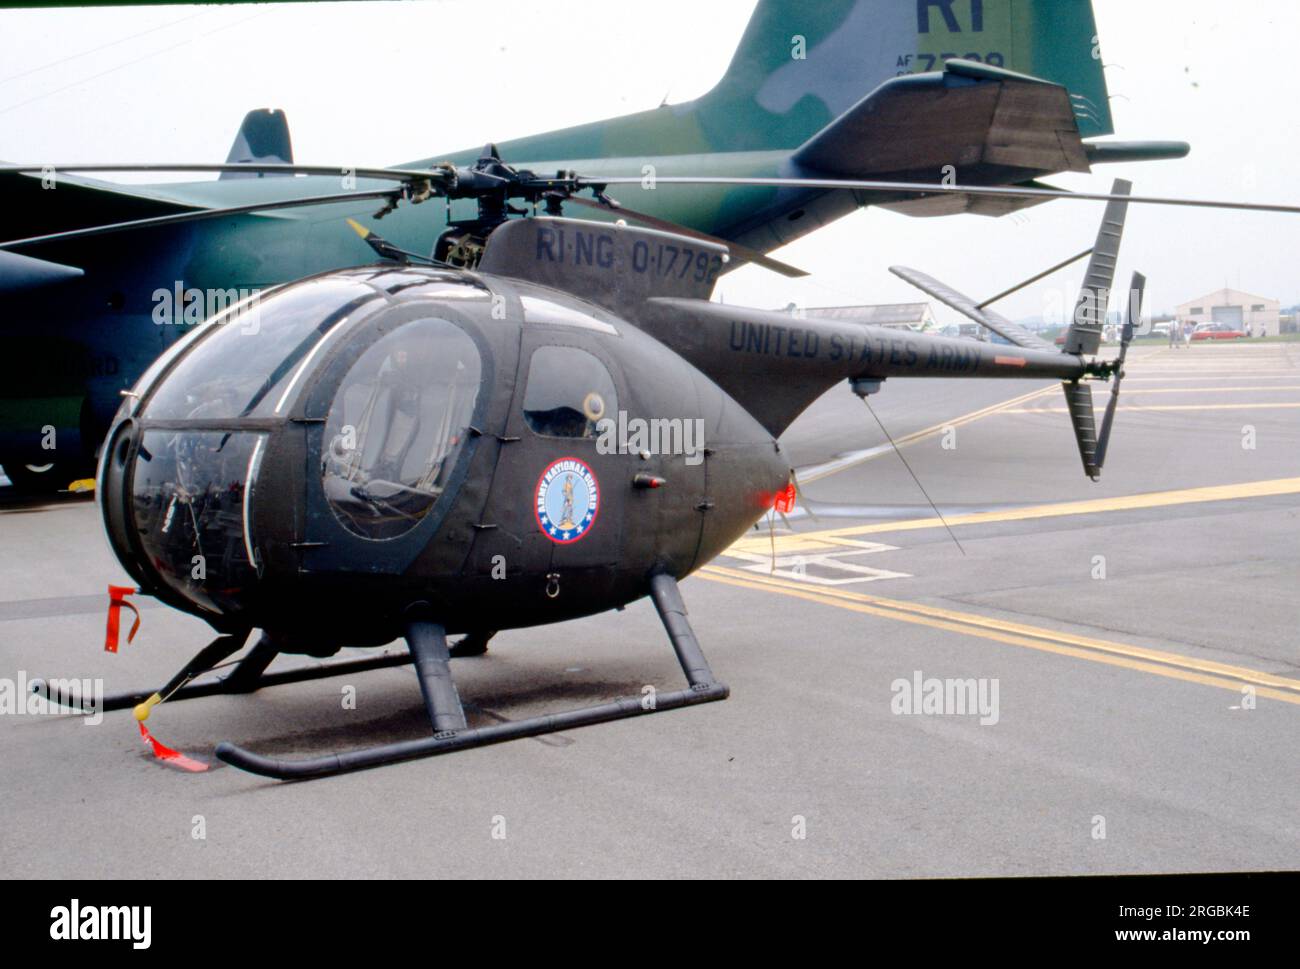 United States Army - Hughes OH-6A O-17792 (msn 0343, 66-17792), of the 1st Battalion, 126th Aviation Regiment, Rhode island National Guard. Stock Photo